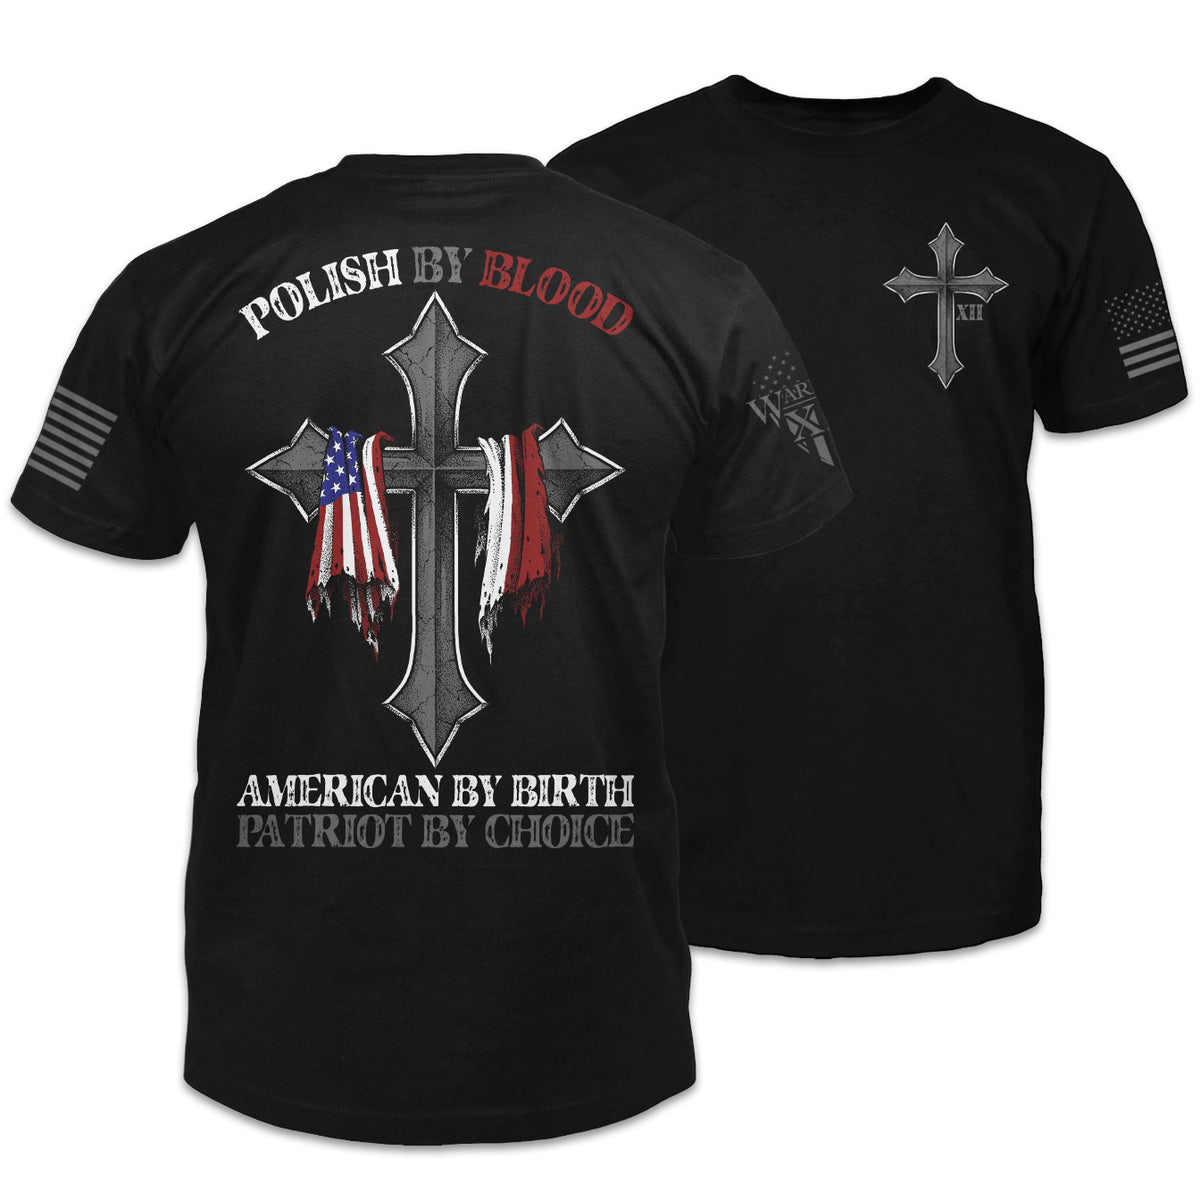 Front and back black t-shirt with the words "Polish By Blood" with a cross holding the American and Polish flags printed on the shirt.